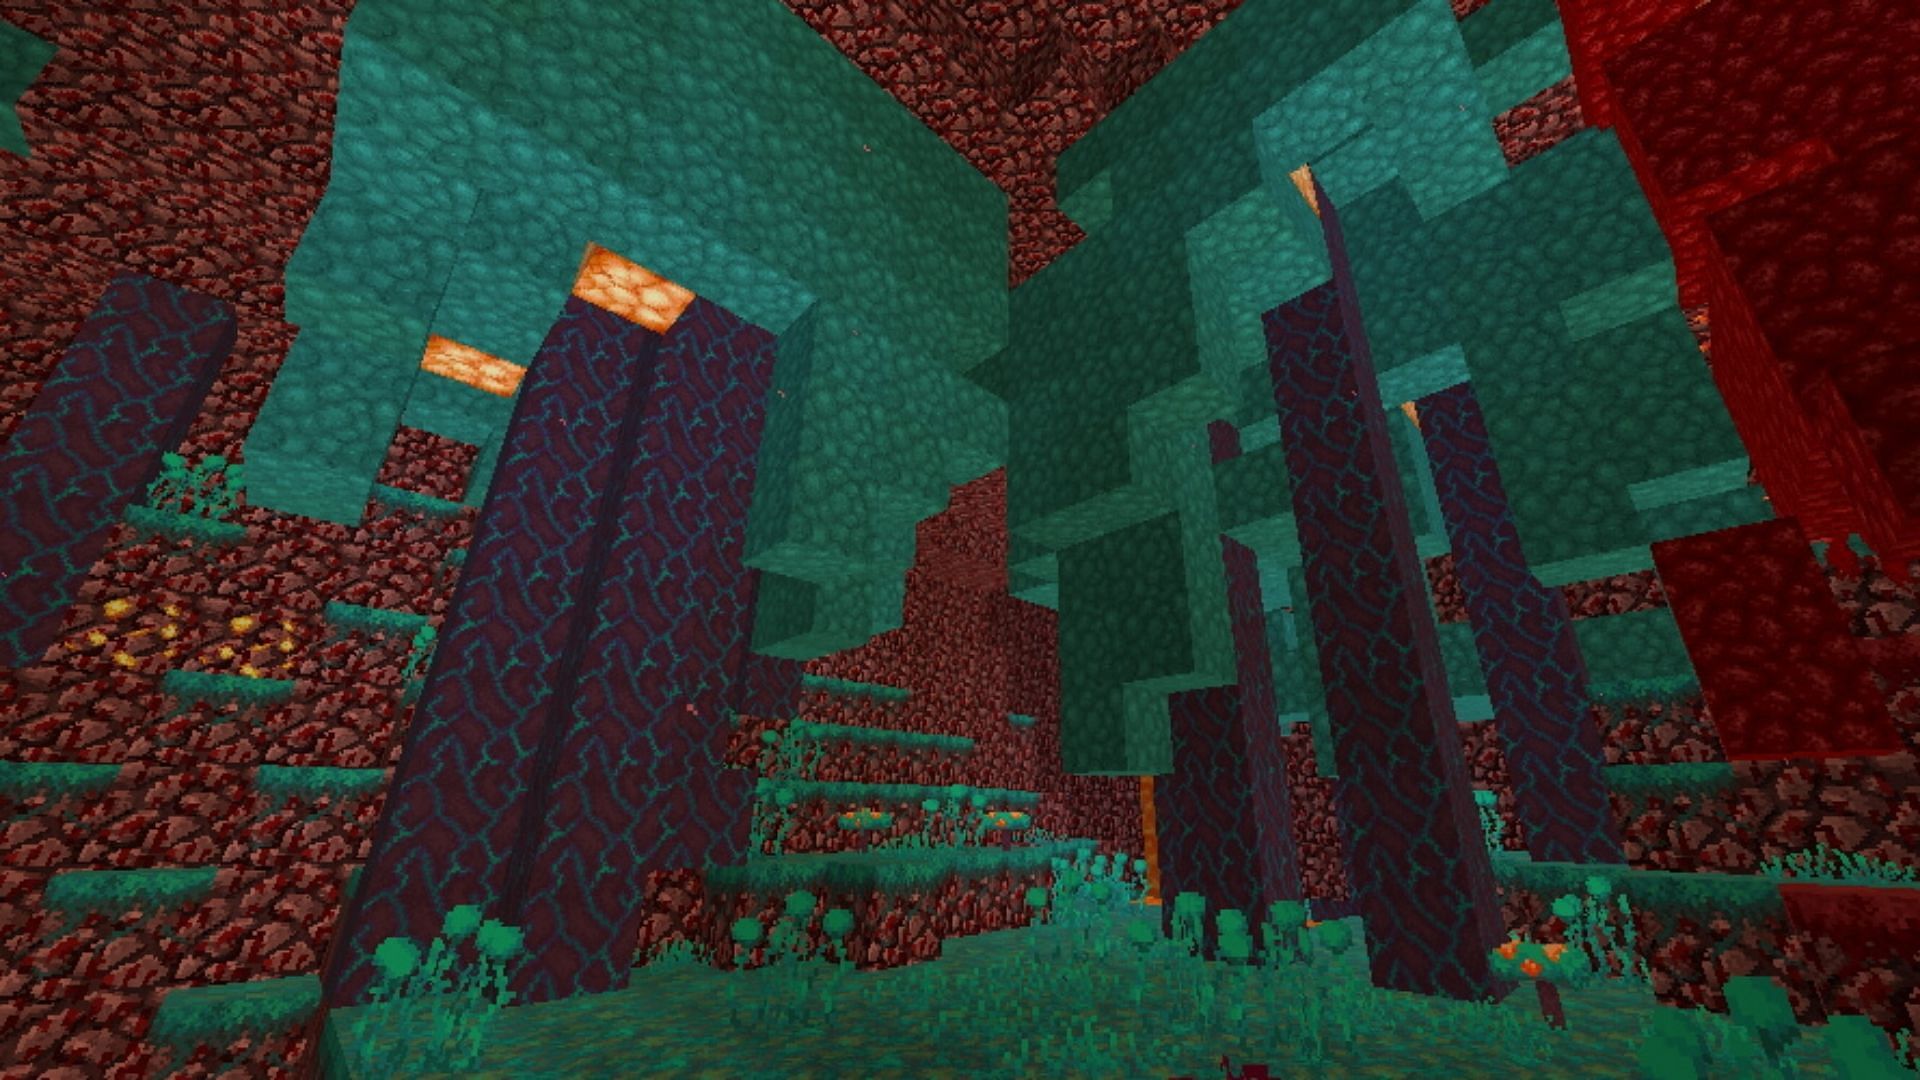 FaithfulVenom is another popular Faithful texture pack alternative made by a Minecraft YouTuber (Image via texture-packs.com)